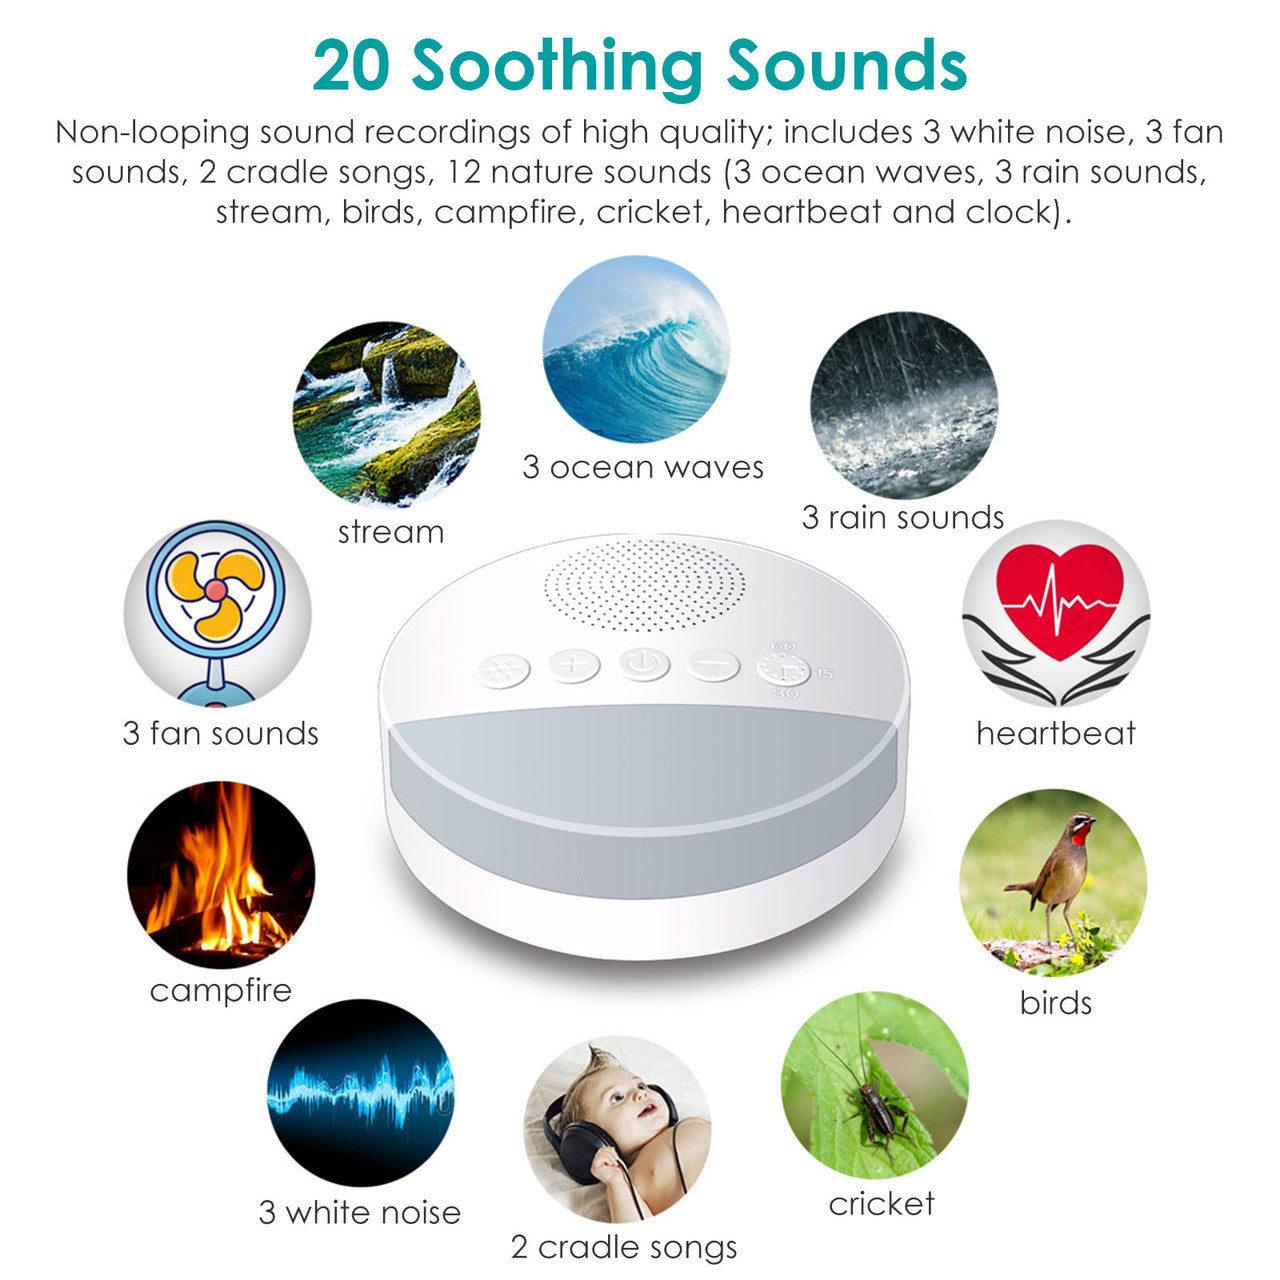 White Noise Machine, Sound Machine for Sleeping, with Baby Soothing Night Light, 20 Soothing Sounds and Timer Memory Adjustable Volume Function, Sleep Sound Therapy for Home Office Baby and Adults